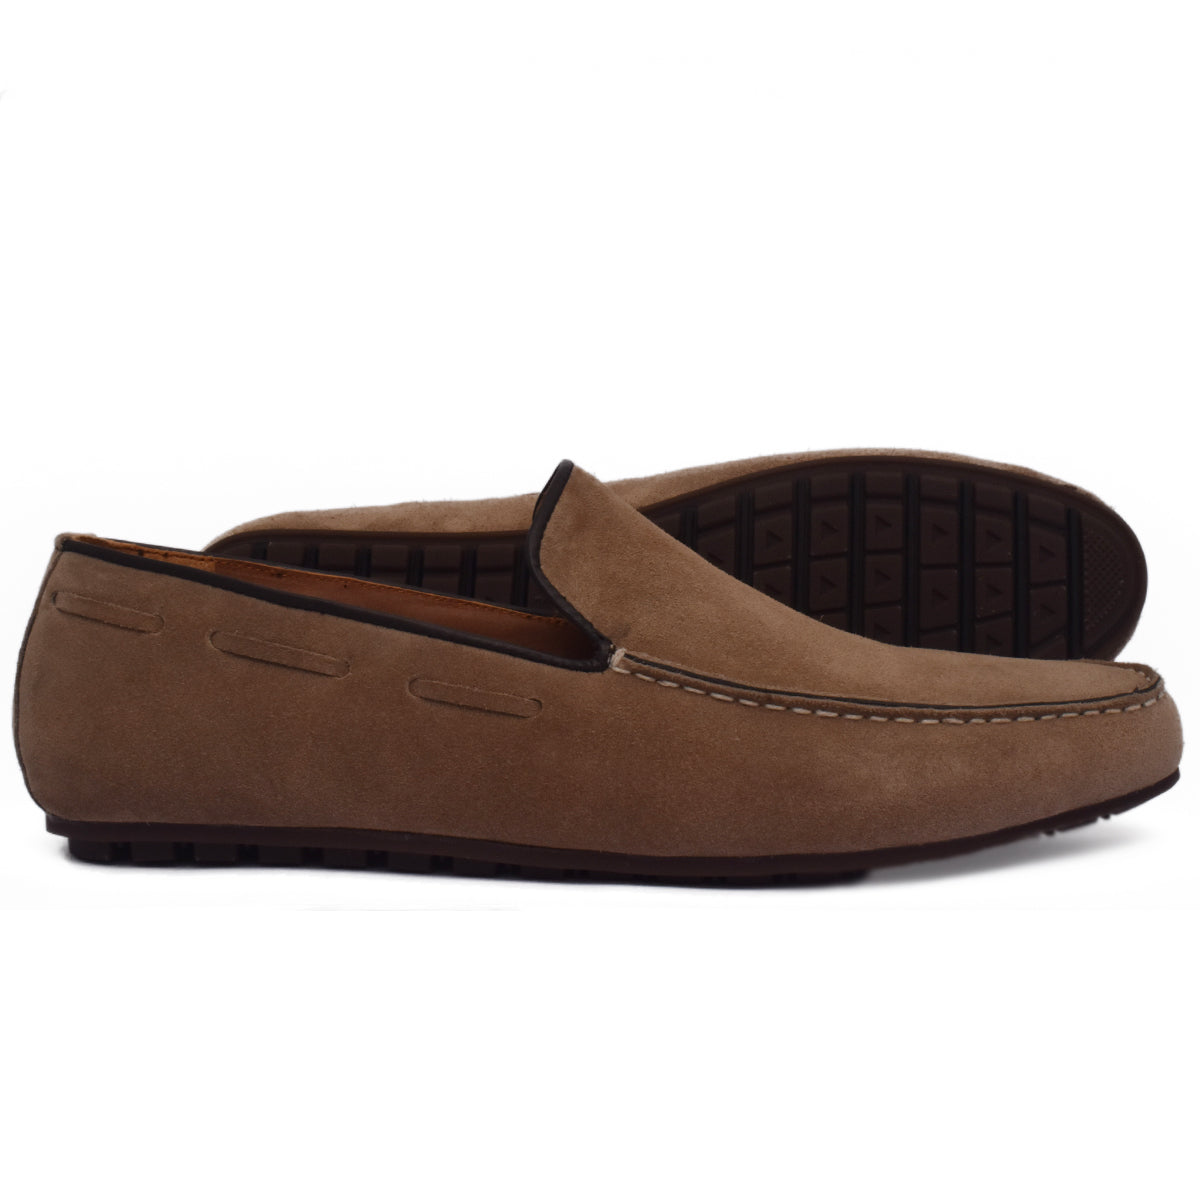 Johny Weber Handmade Brown Suede Leather